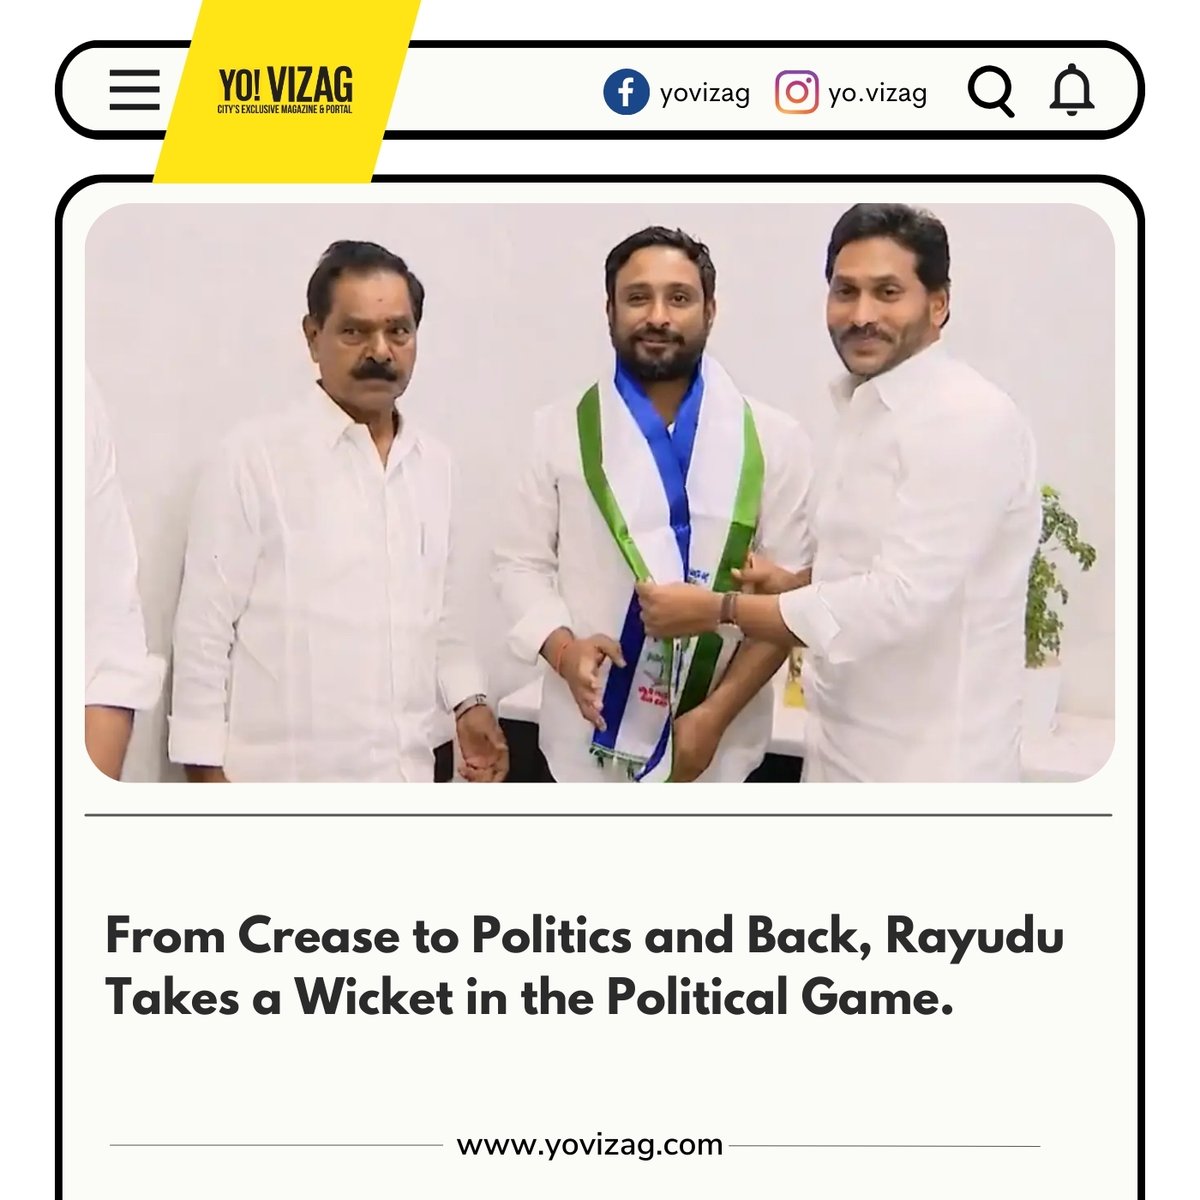 YSRCP loses a new recruit. The Indian cricketer leaves the pitch of politics, for now. What's next, Ambati? #AmbatiRayudu #YSRCP #AndhraPradesh